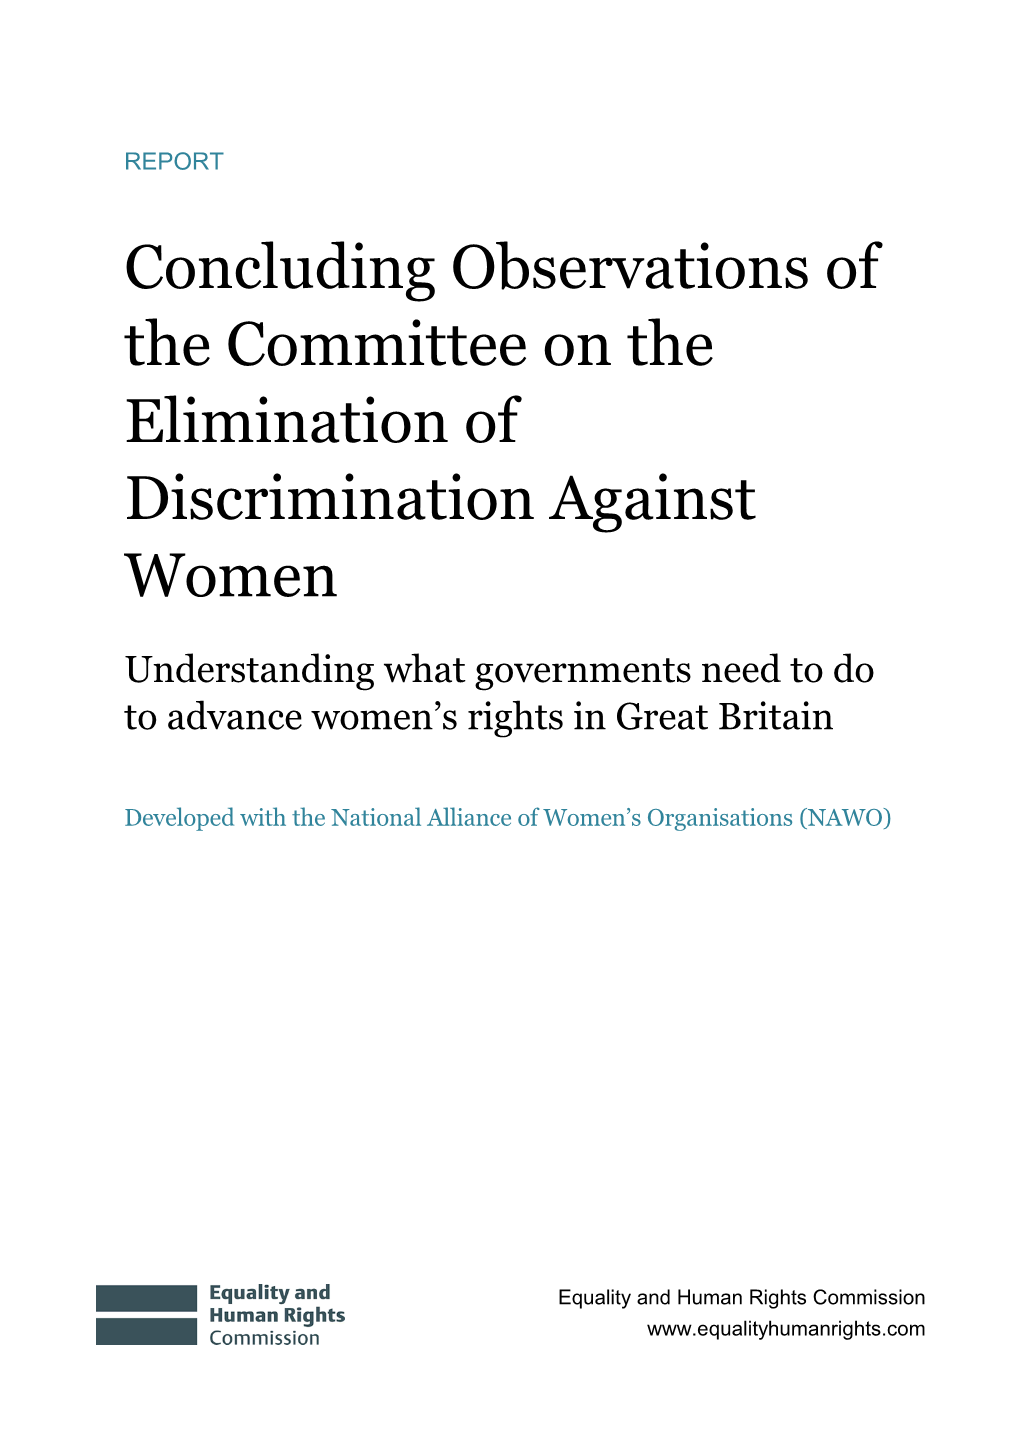 Conversation Observations of the Committee on the Elimination of Discrimination Against Women